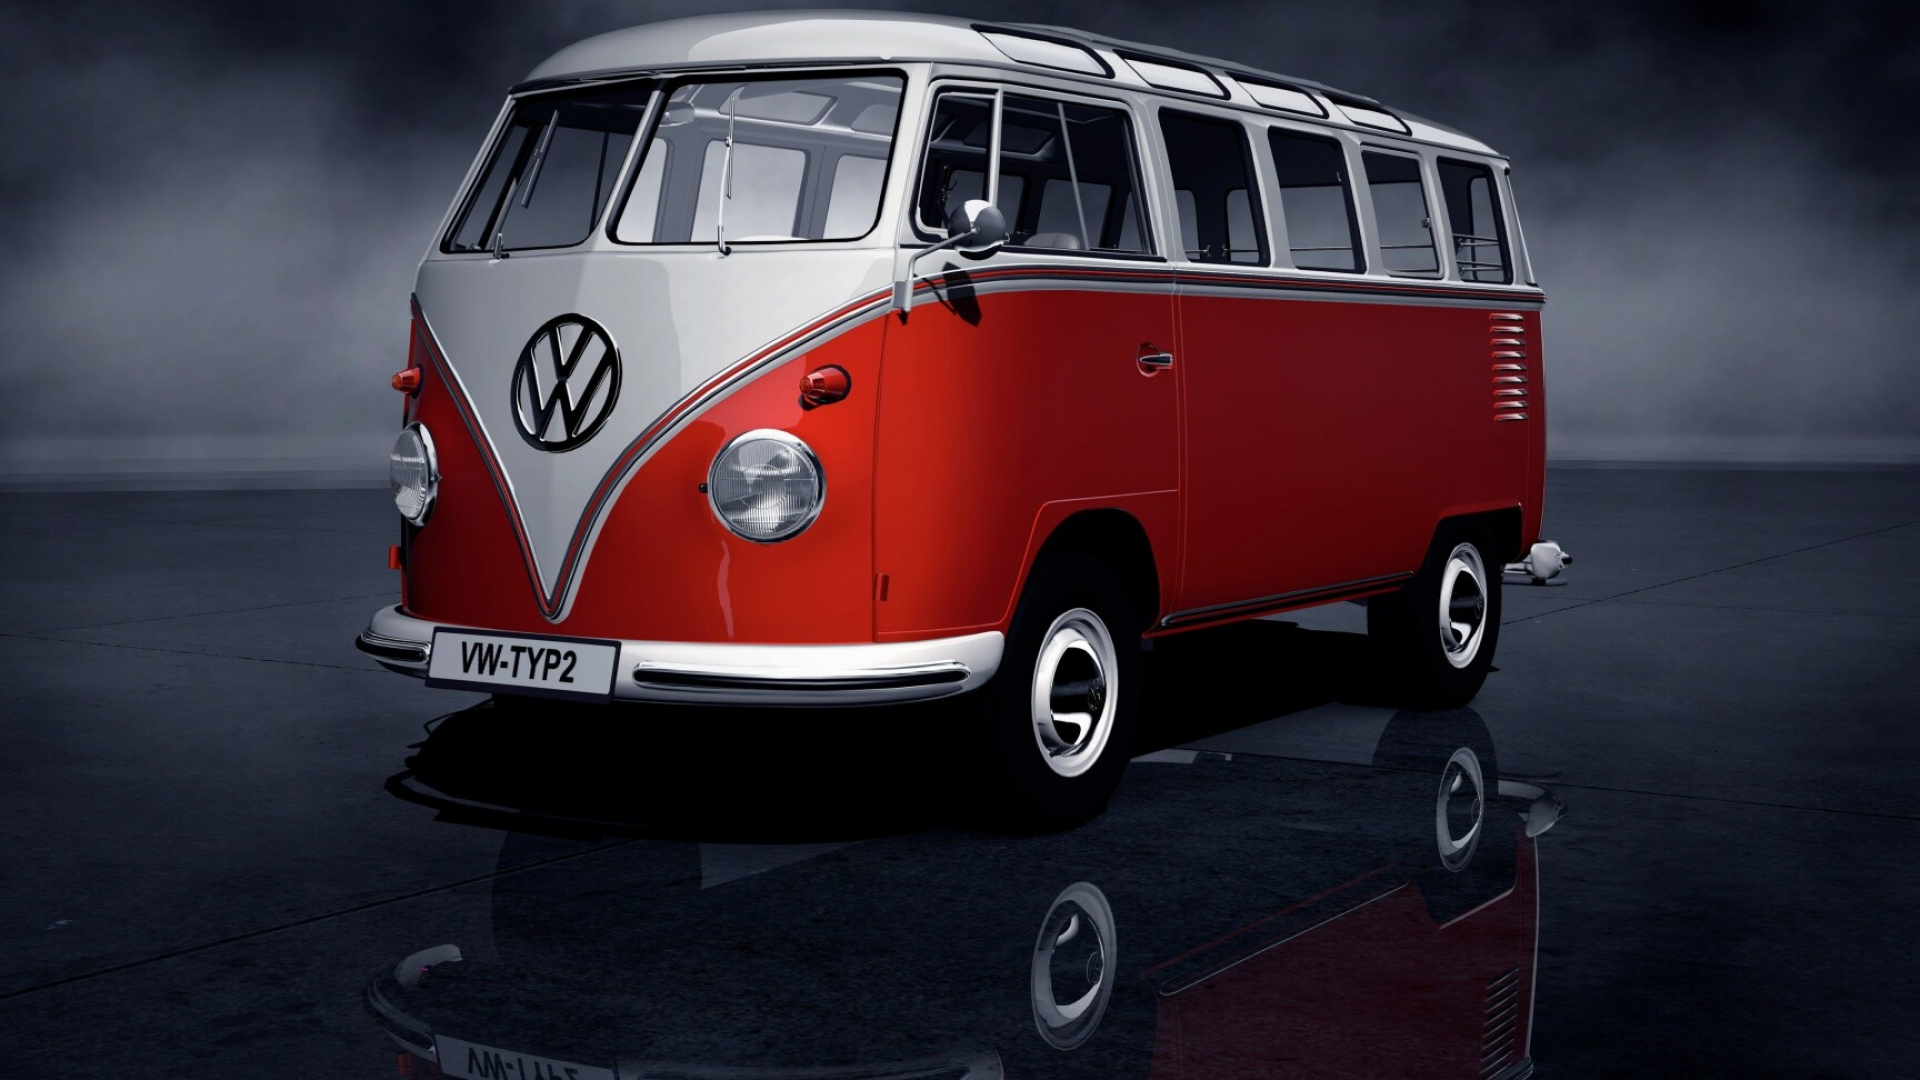 Volkswagen: Type 2, One of the forerunners of the modern cargo and passenger vans. 1920x1080 Full HD Background.